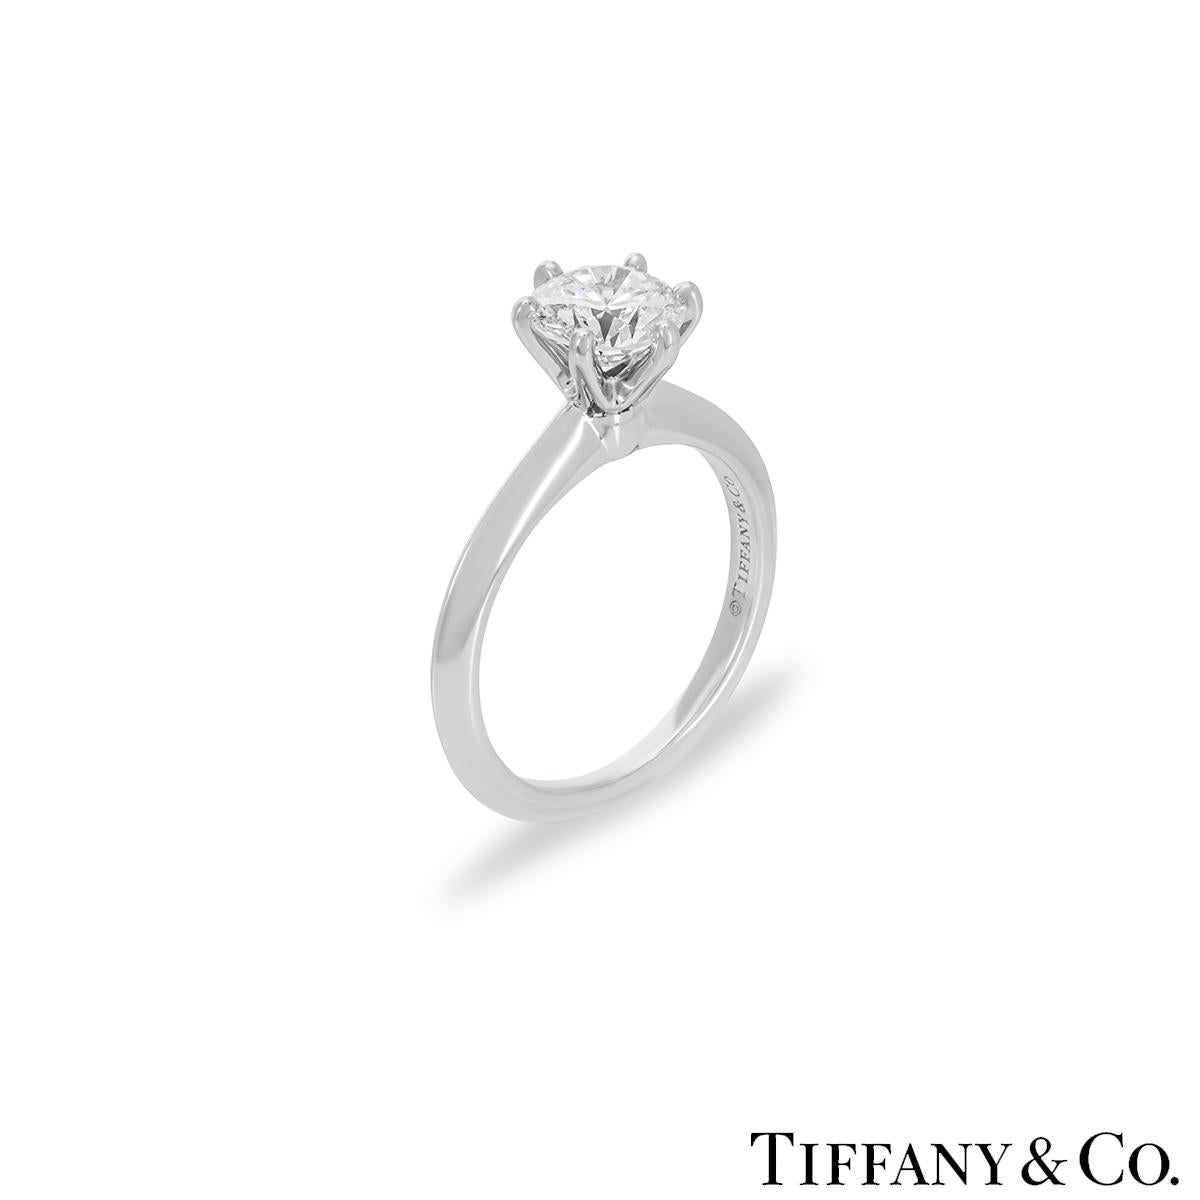 A beautiful platinum diamond ring by Tiffany & Co. from the Setting collection. The ring comprises of a round brilliant cut diamond in a 6 claw setting with a weight of 1.08ct, I colour and VS1 clarity. The diamond scores an excellent rating in all